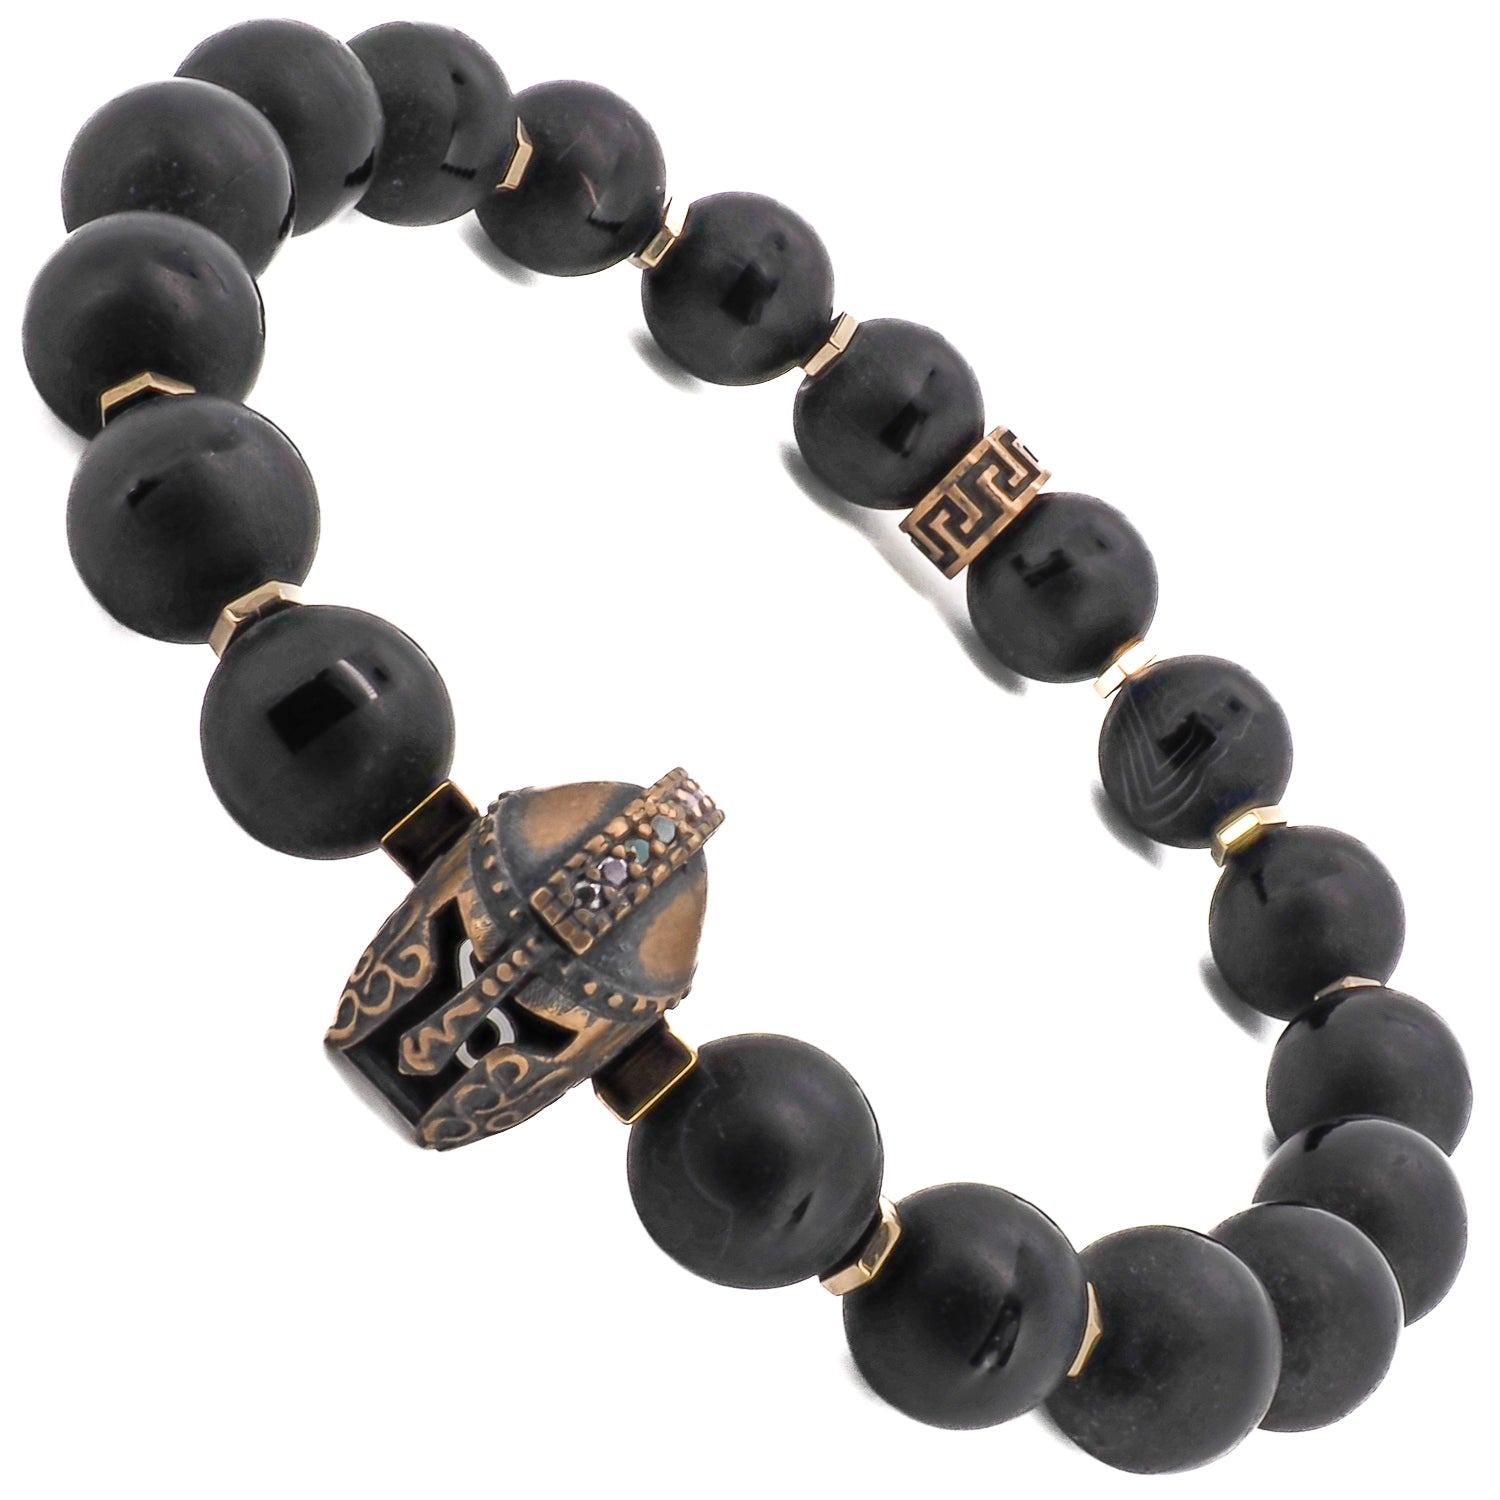 The combination of black onyx stone beads and a bronze gladiator helmet bead makes this bracelet both manly and stylish.